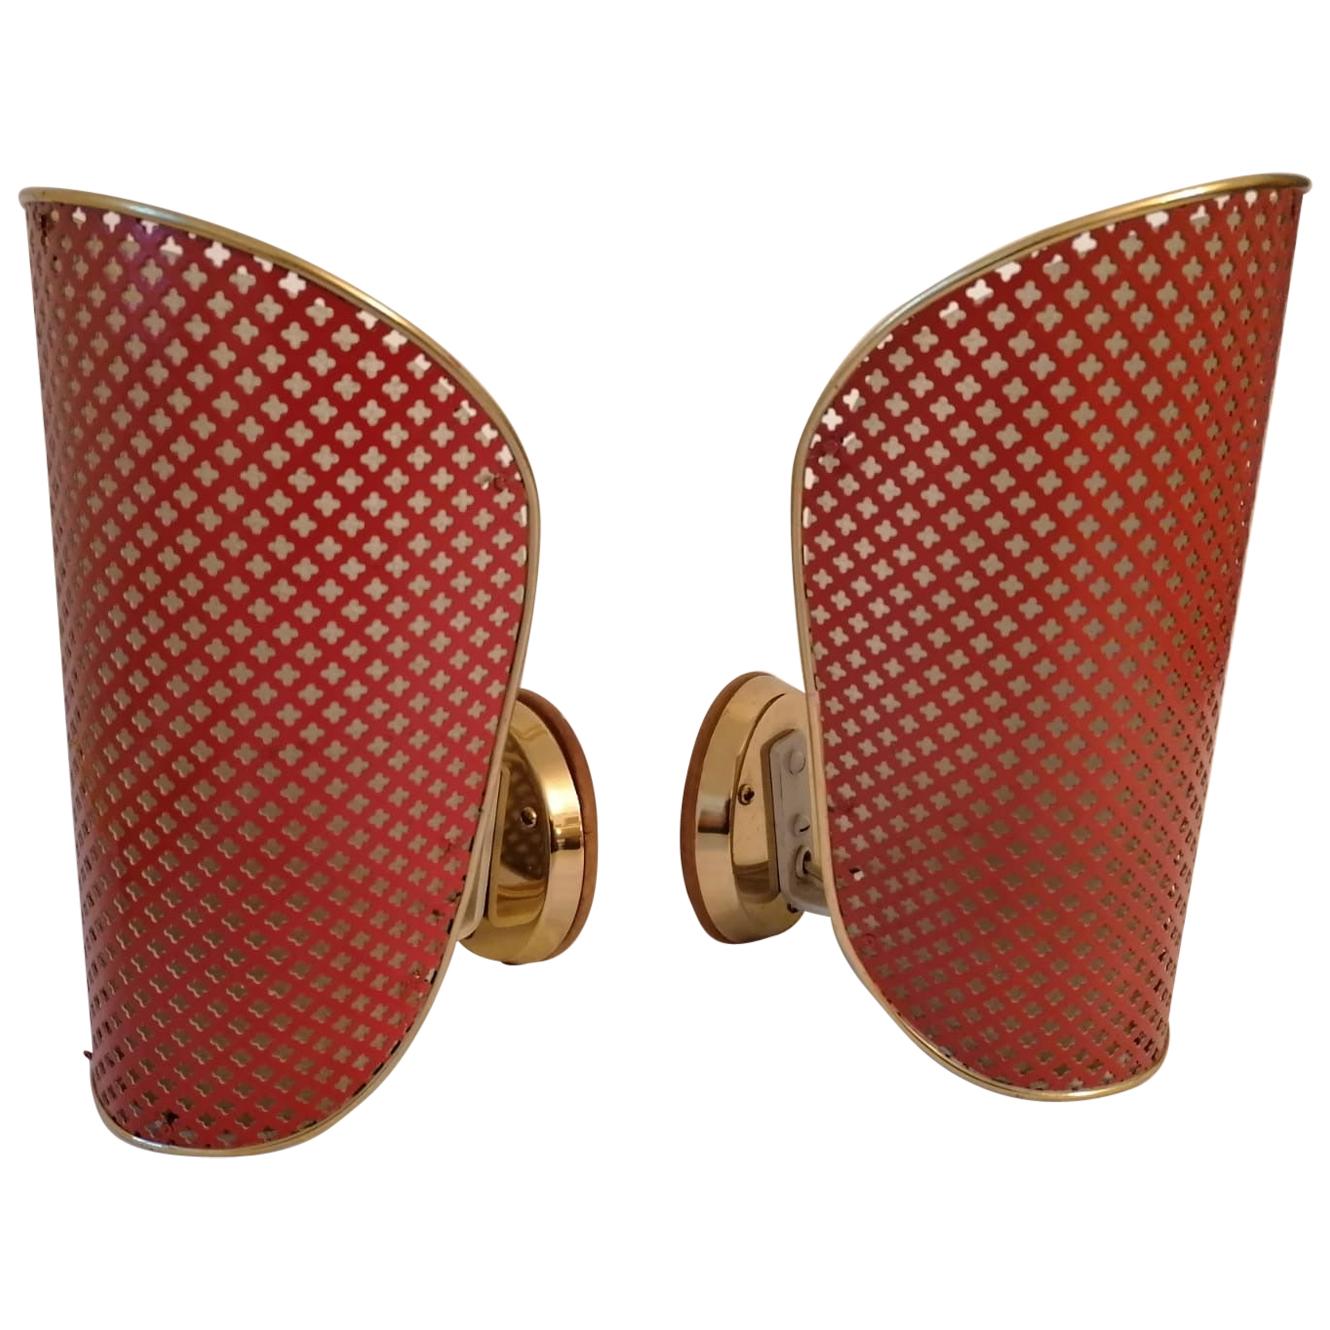 Pair of Red Midcentury Wall Lamps Attributed to Rupert Nikoll